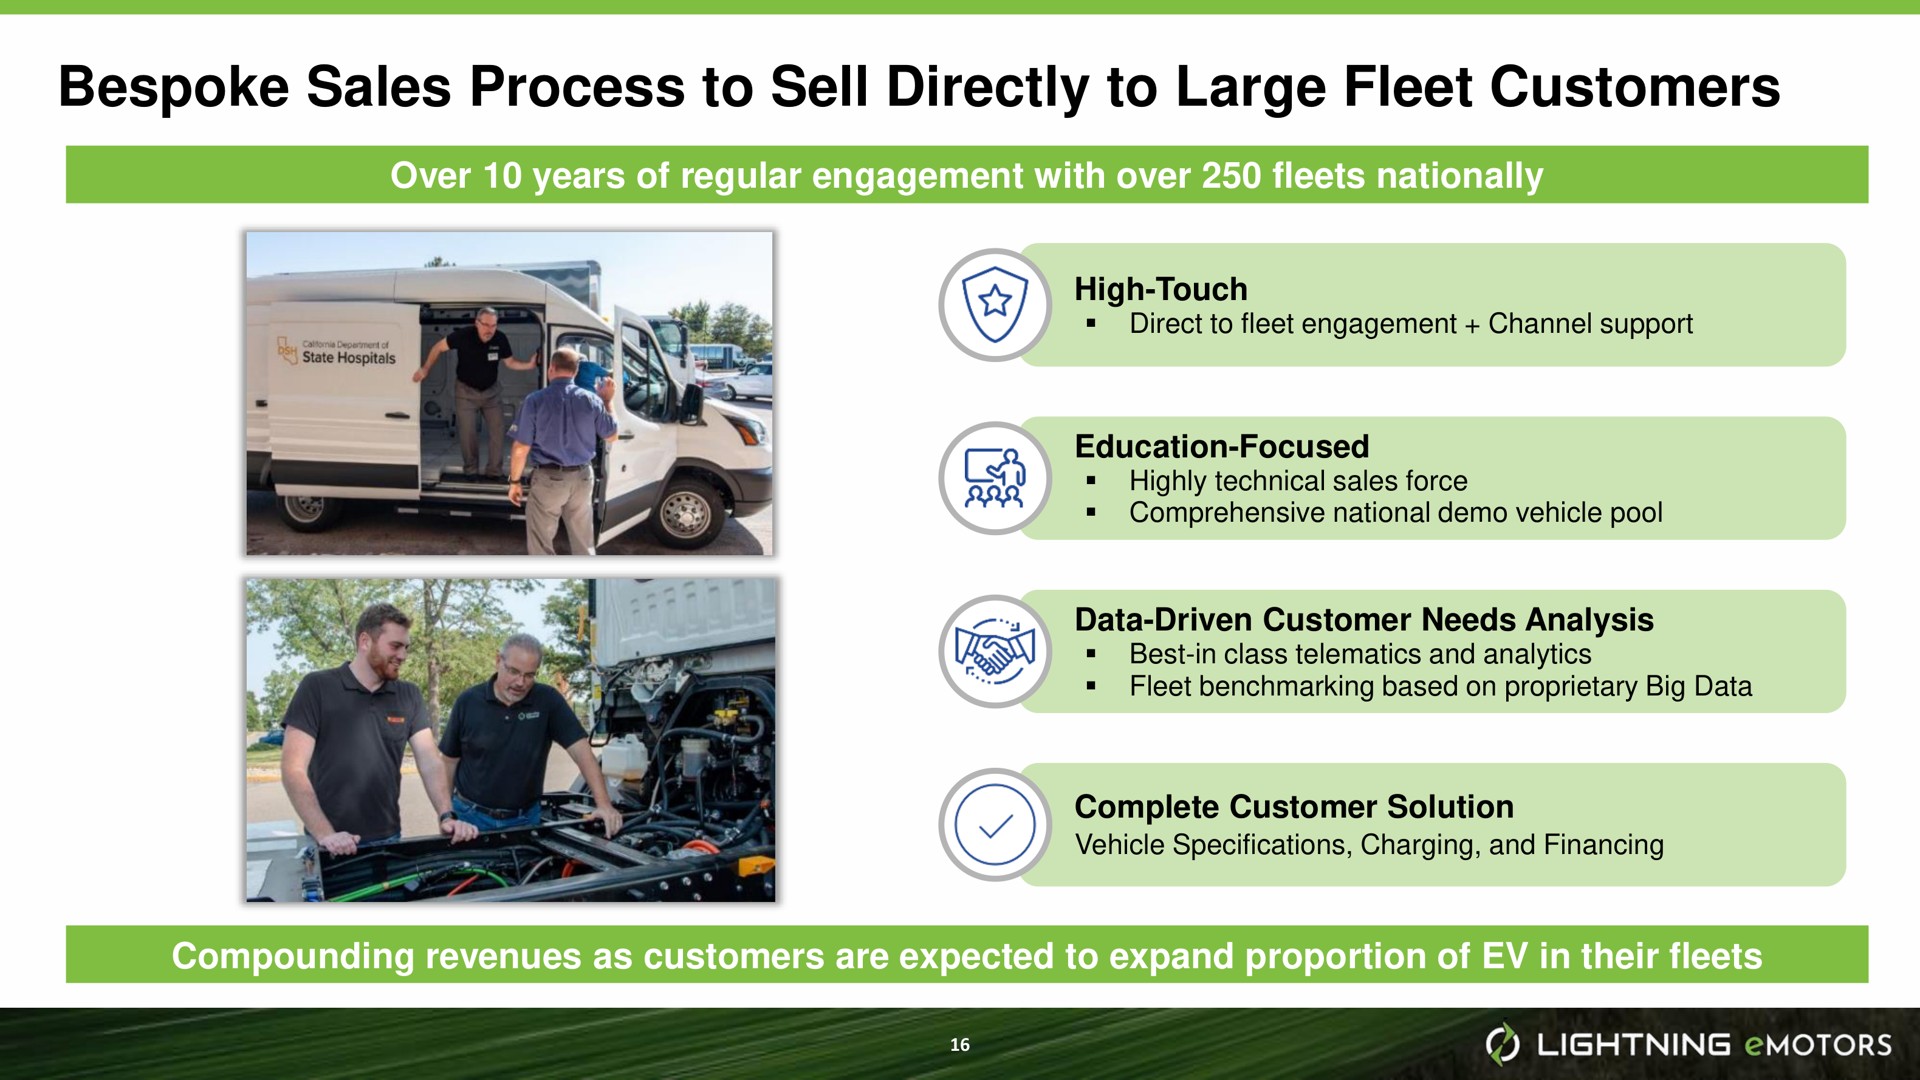 bespoke sales process to sell directly to large fleet customers | Lightning eMotors